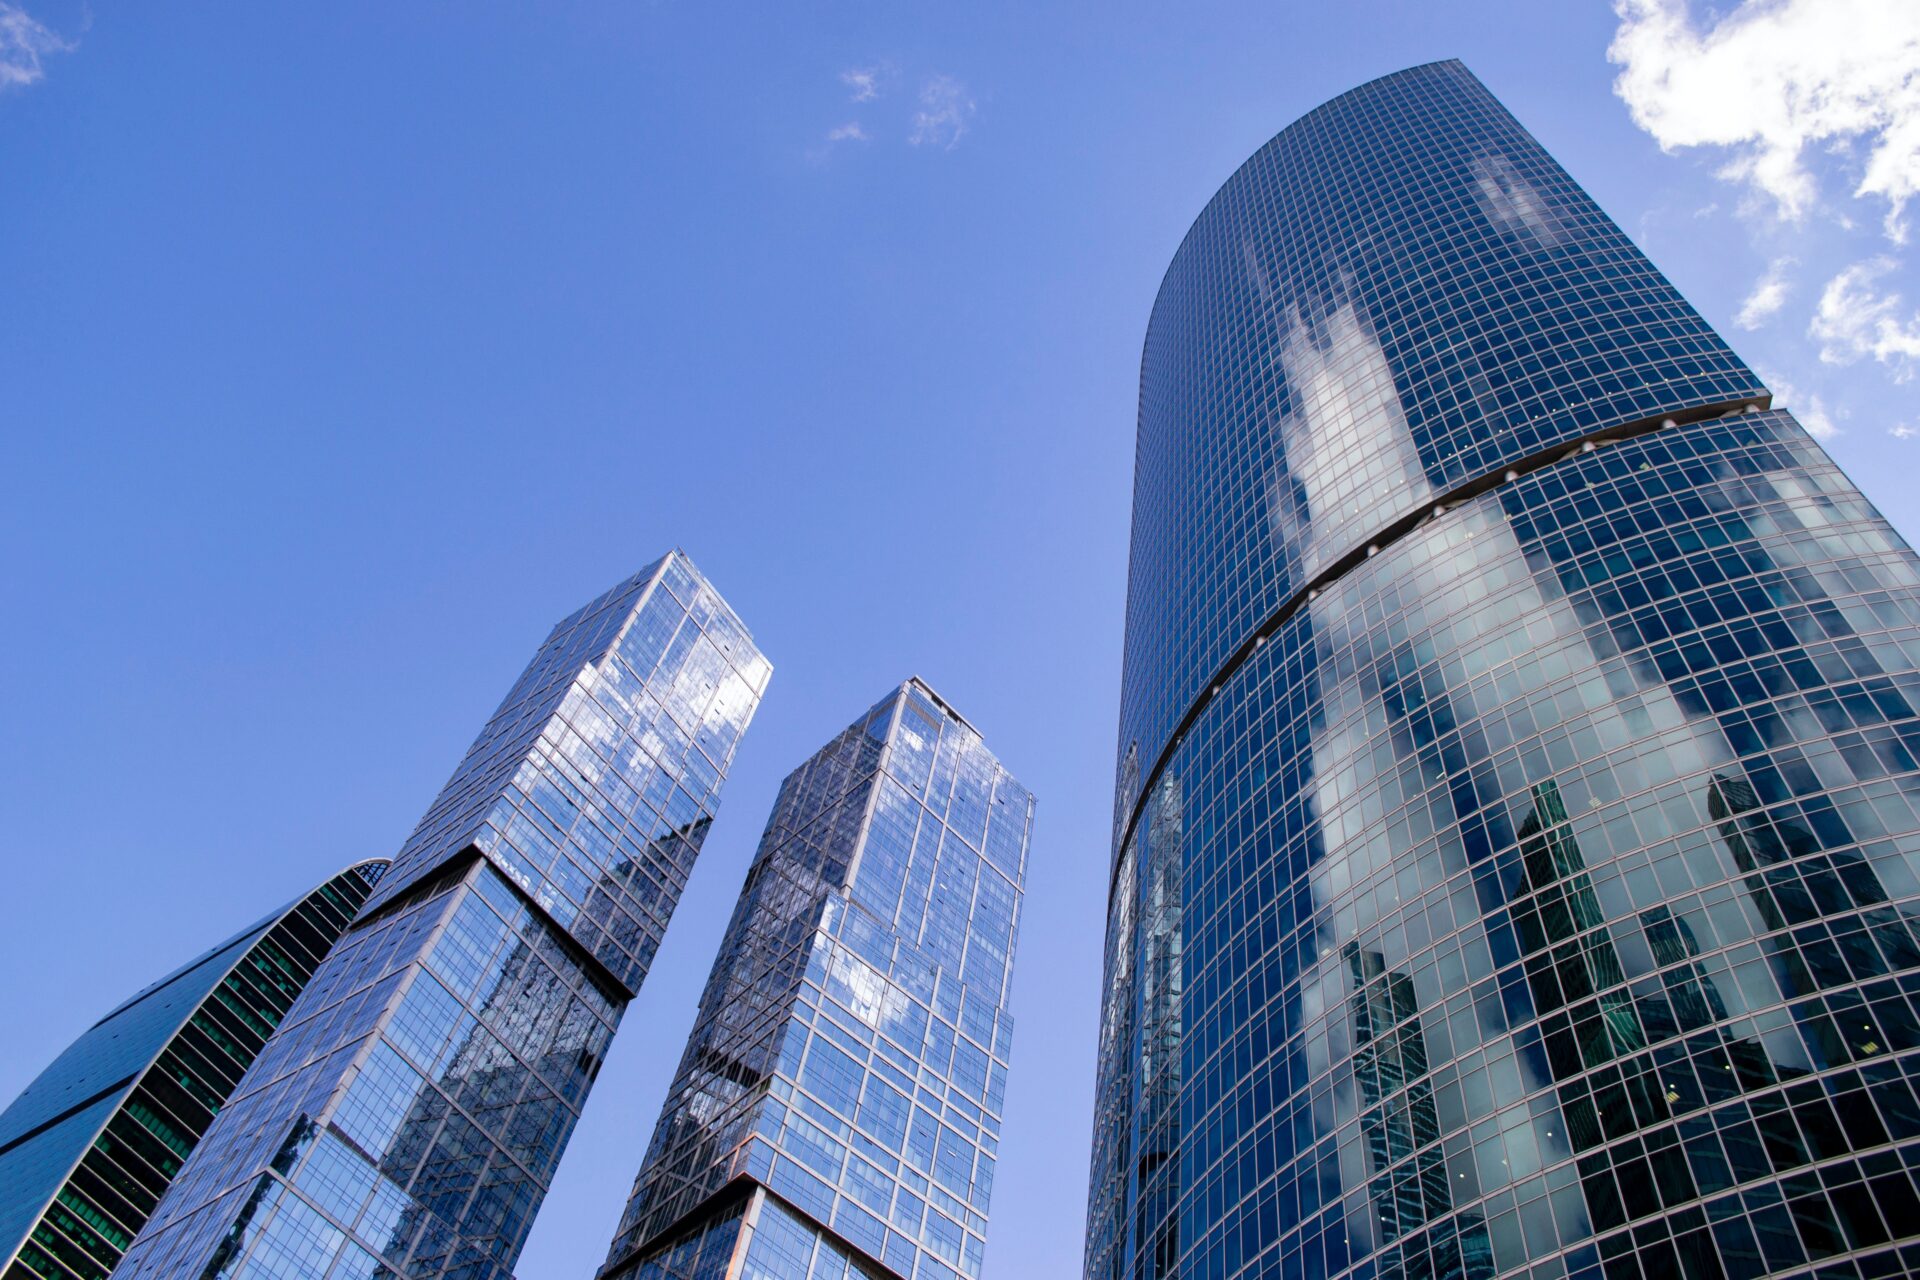 A group of tall buildings with a sky background